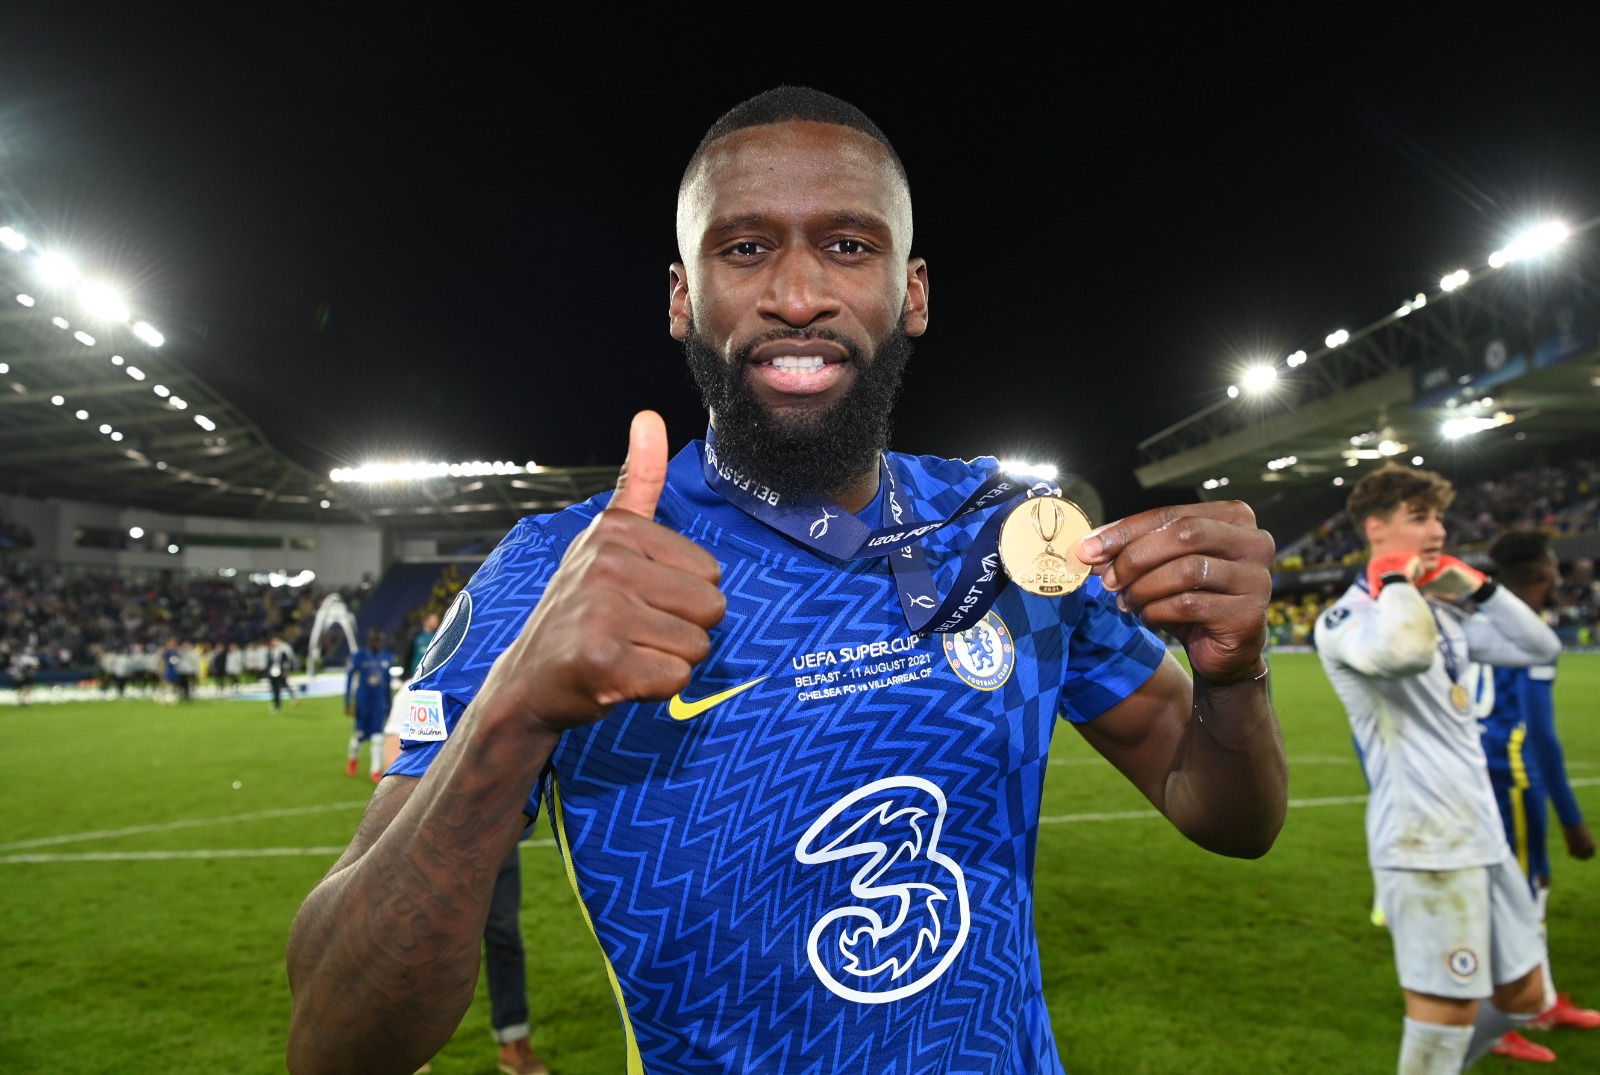 Leave Chelsea with heavy heart as it has meant everything to me, confesses Antonio Rudiger